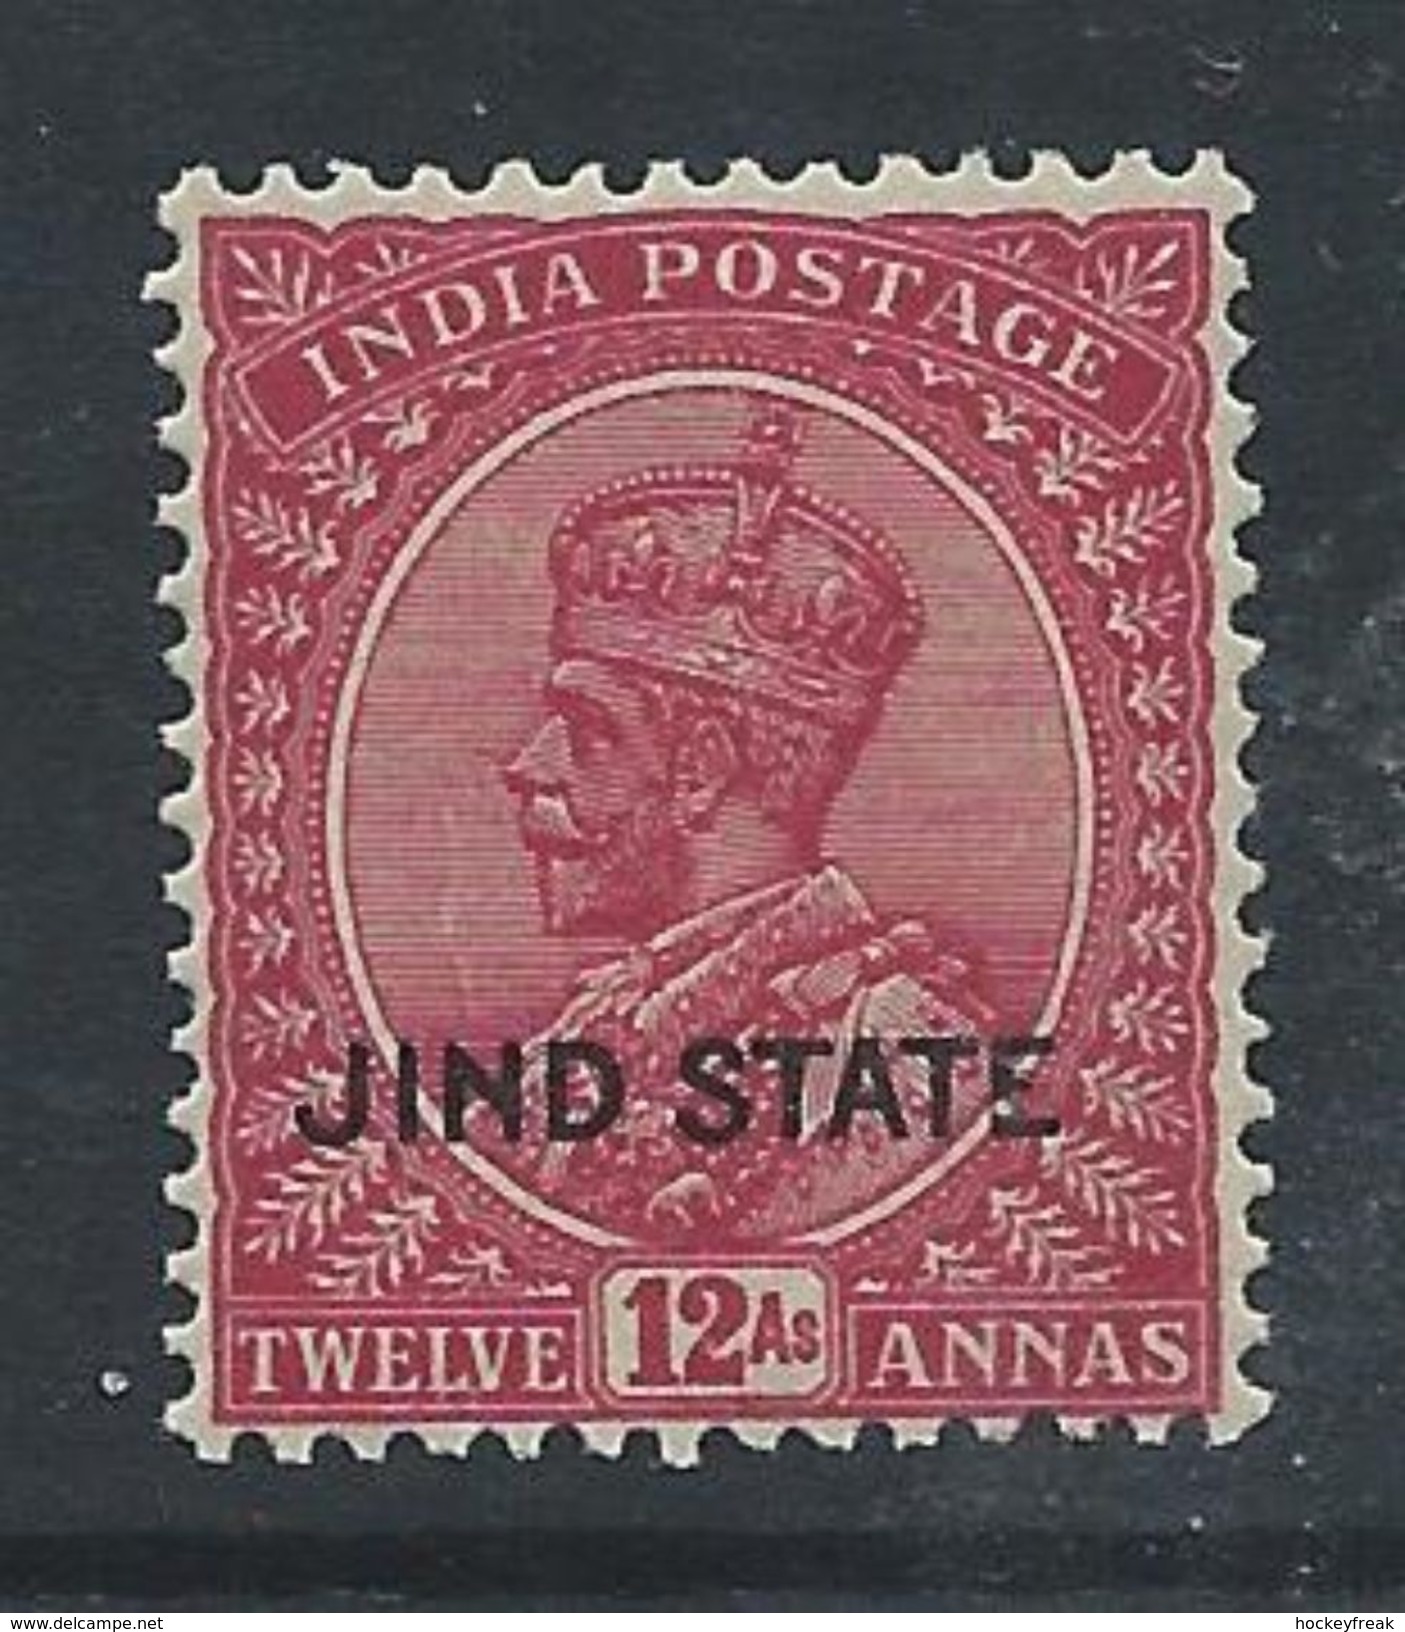 Indian States, Jind 1930 - 12a Claret, Wmk Upright SG97 MNH Cat £24 As MH SG2020 - Please See Full Description Below - Jhind